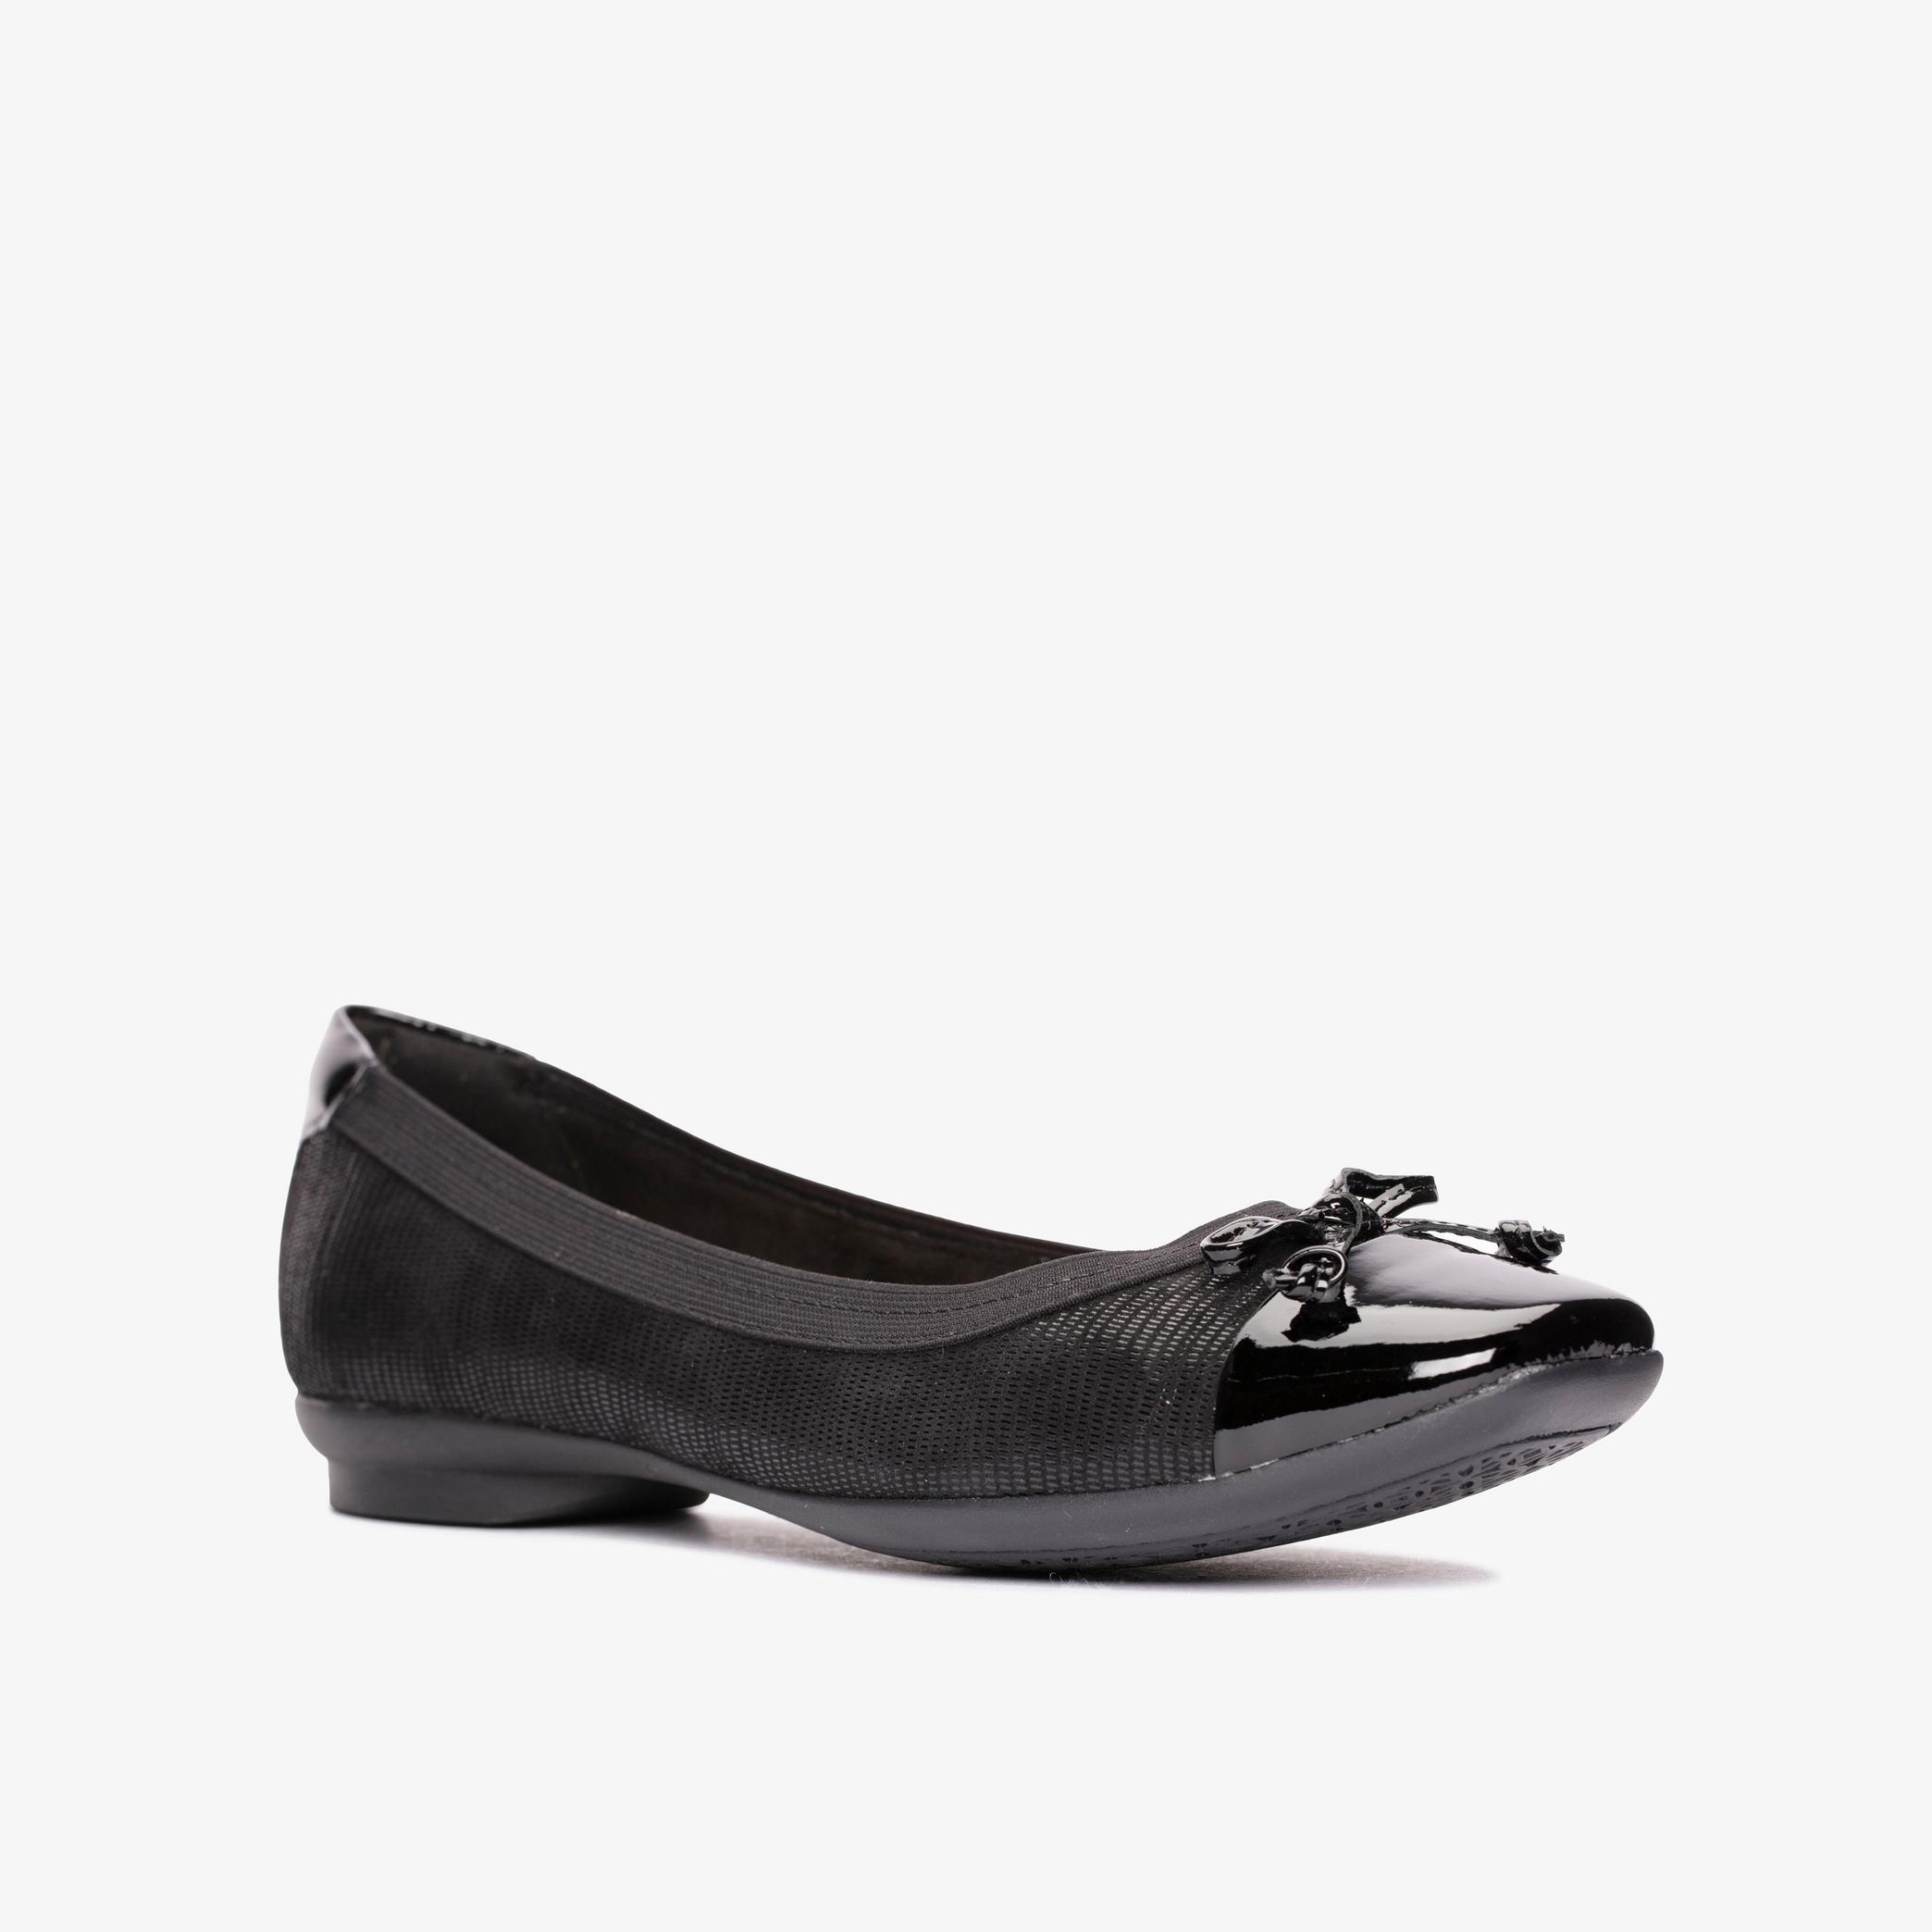 Candra Glow Black Suede Slip Ons, view 3 of 6